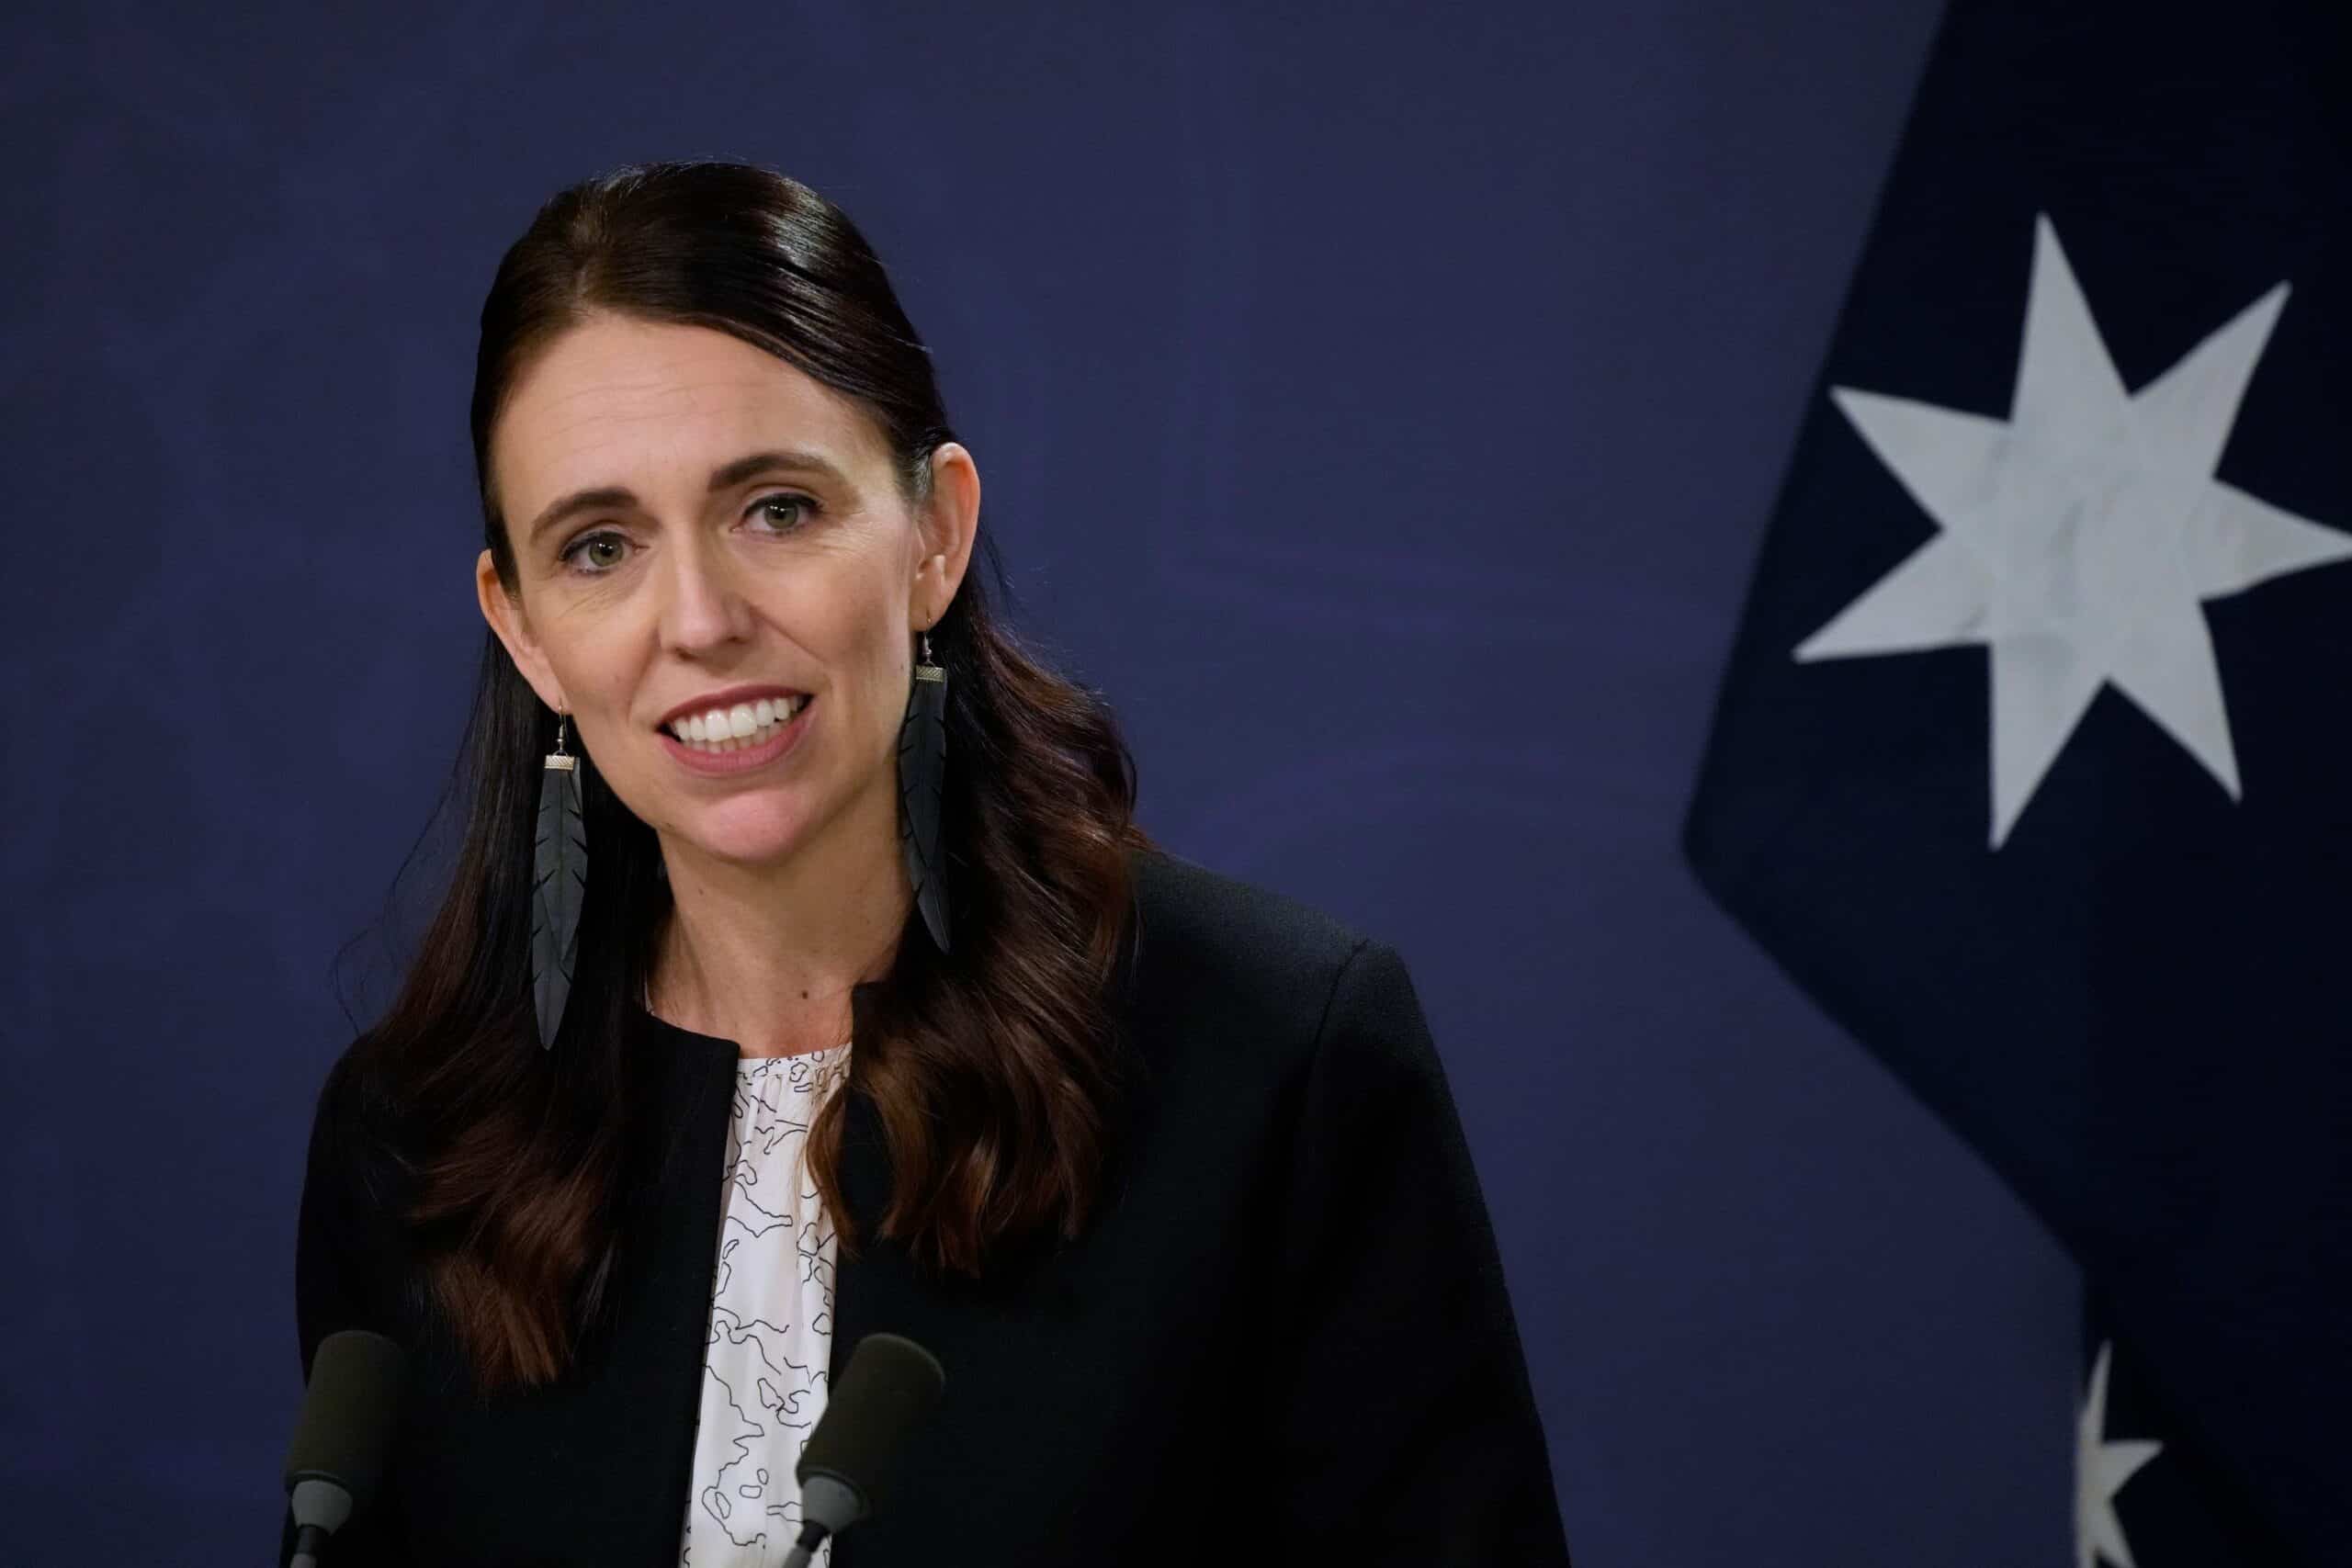 ‘Such an arrogant pr*ck’: Ardern’s microphone blunder auctioned for charity